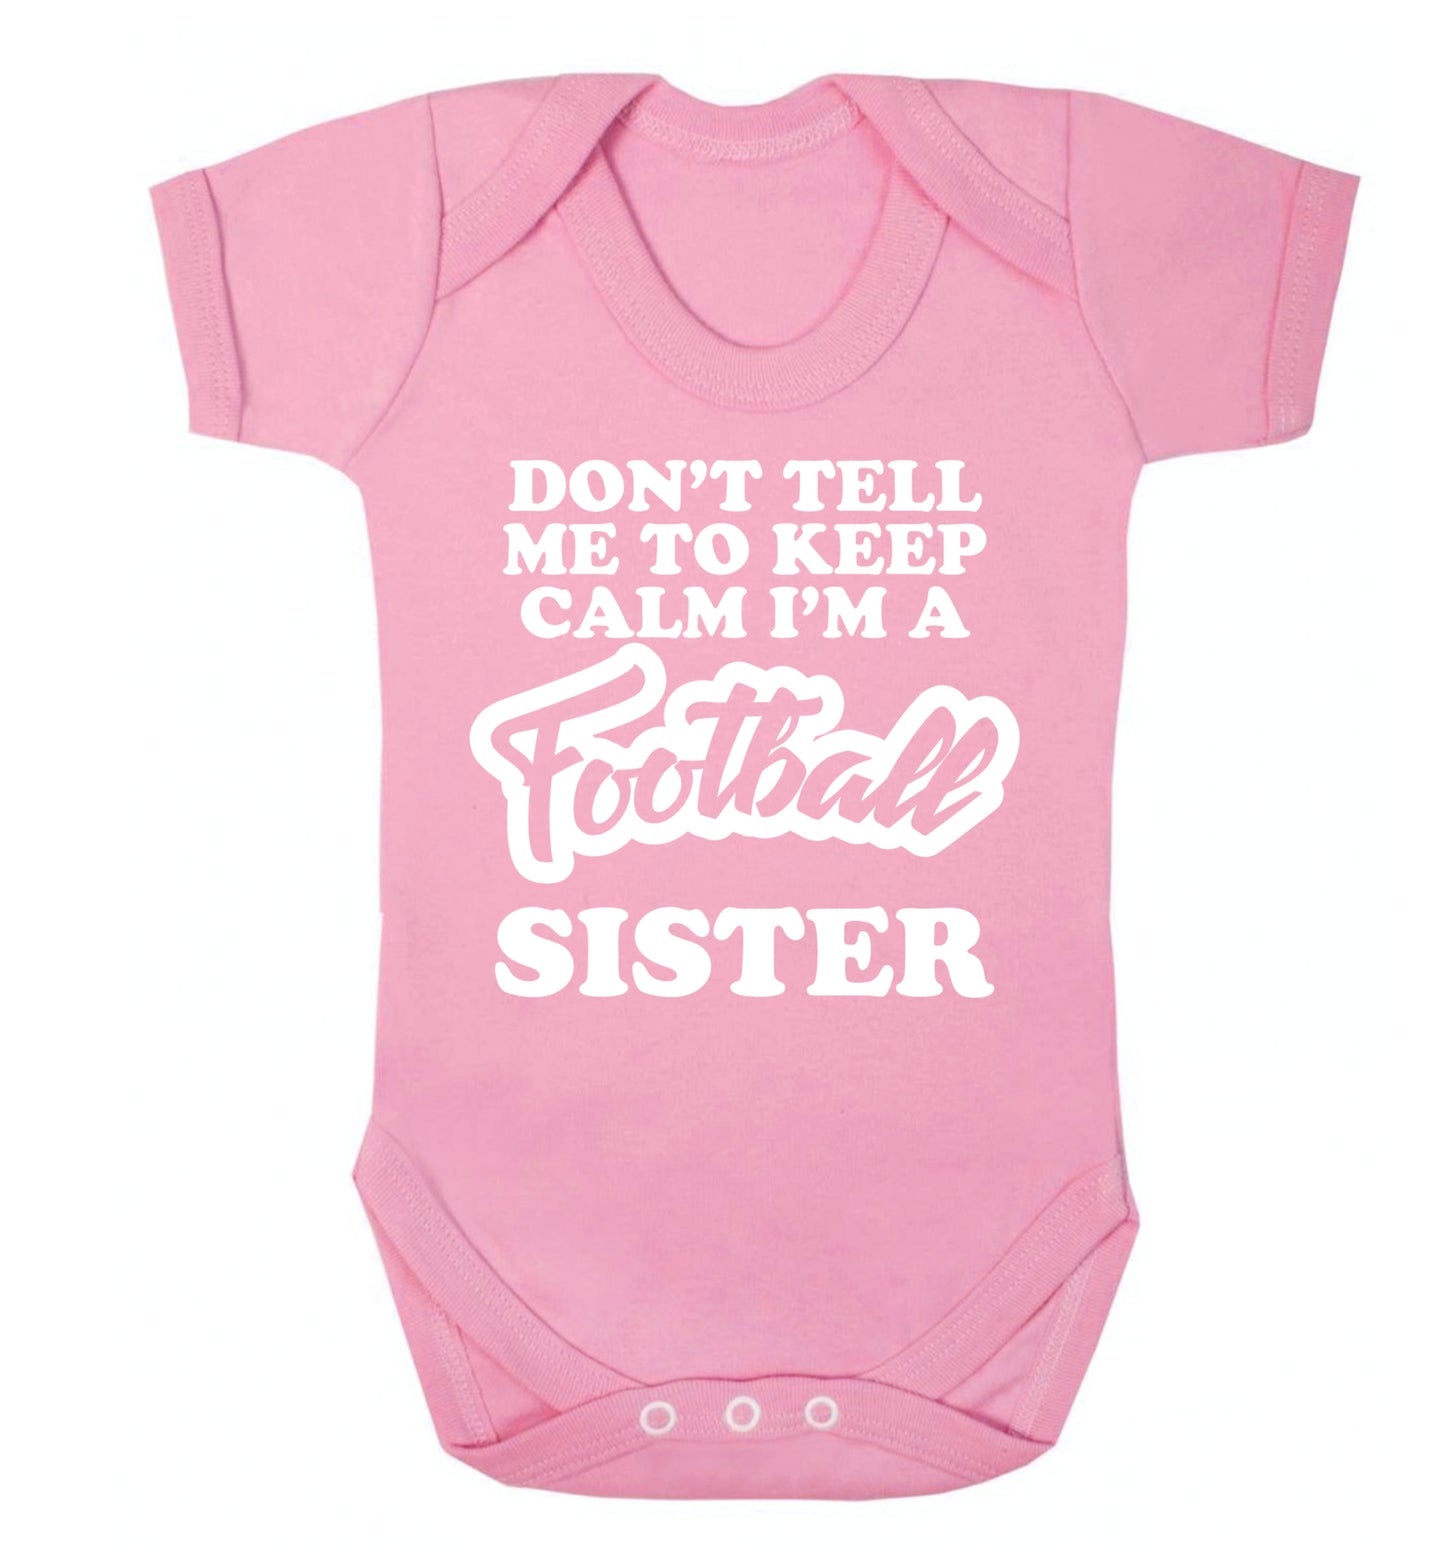 Don't tell me to keep calm I'm a football sister Baby Vest pale pink 18-24 months